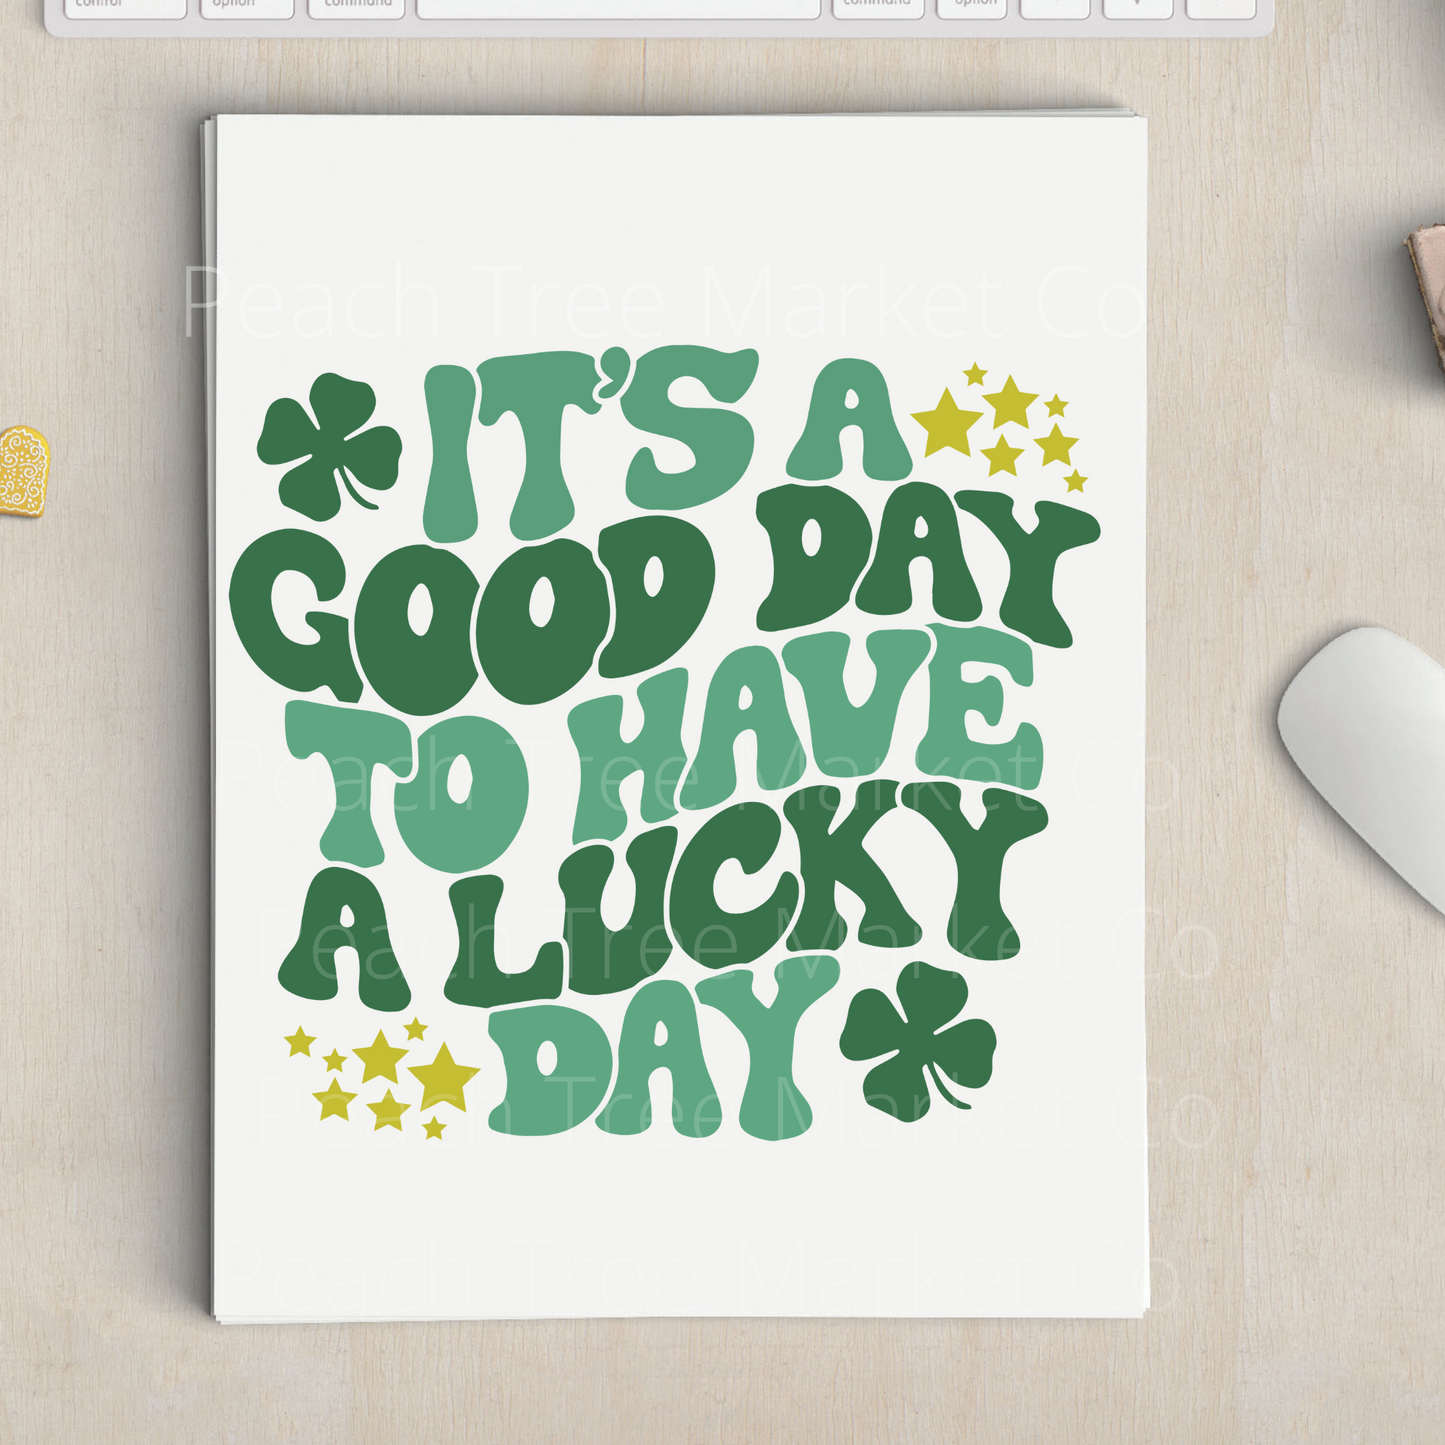 Its a Good Day To Have a Lucky Day Sublimation Transfer